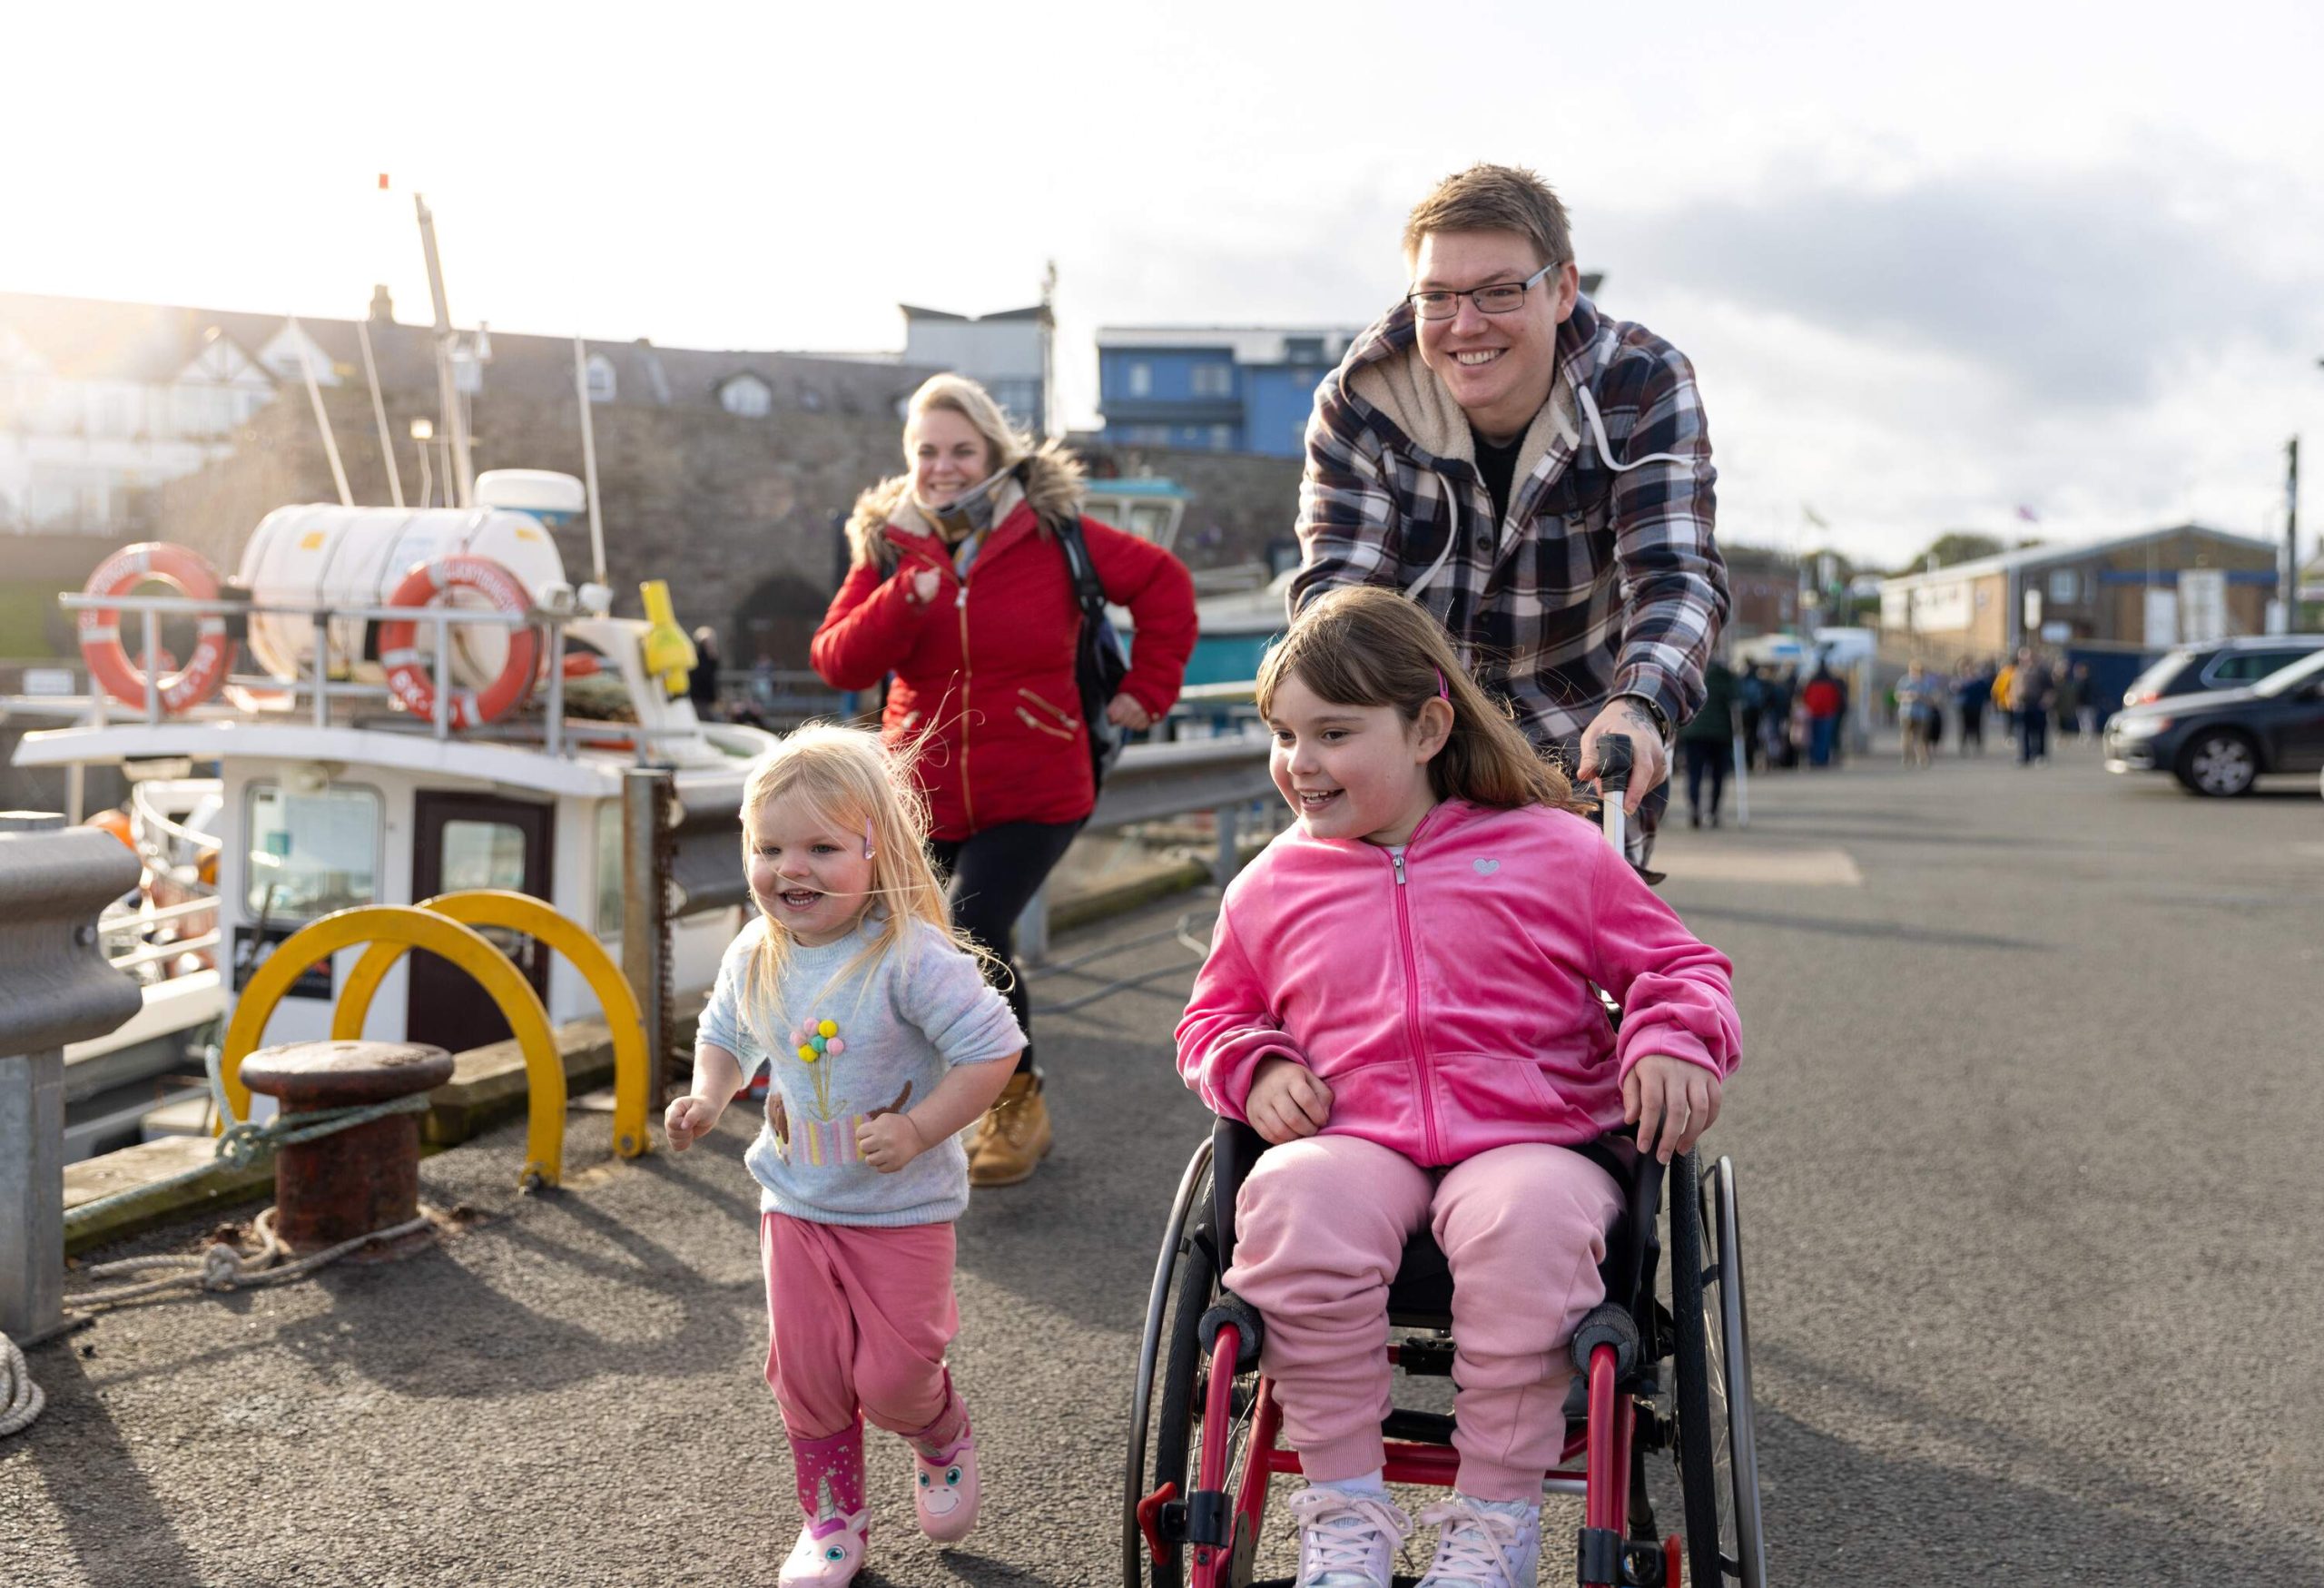 A family with two children enjoying a day out together in Beadnell, North East England. They are moving past the harbour and the main focus is the father running while pushing his daughter who is a wheelchair user. They all look excited.